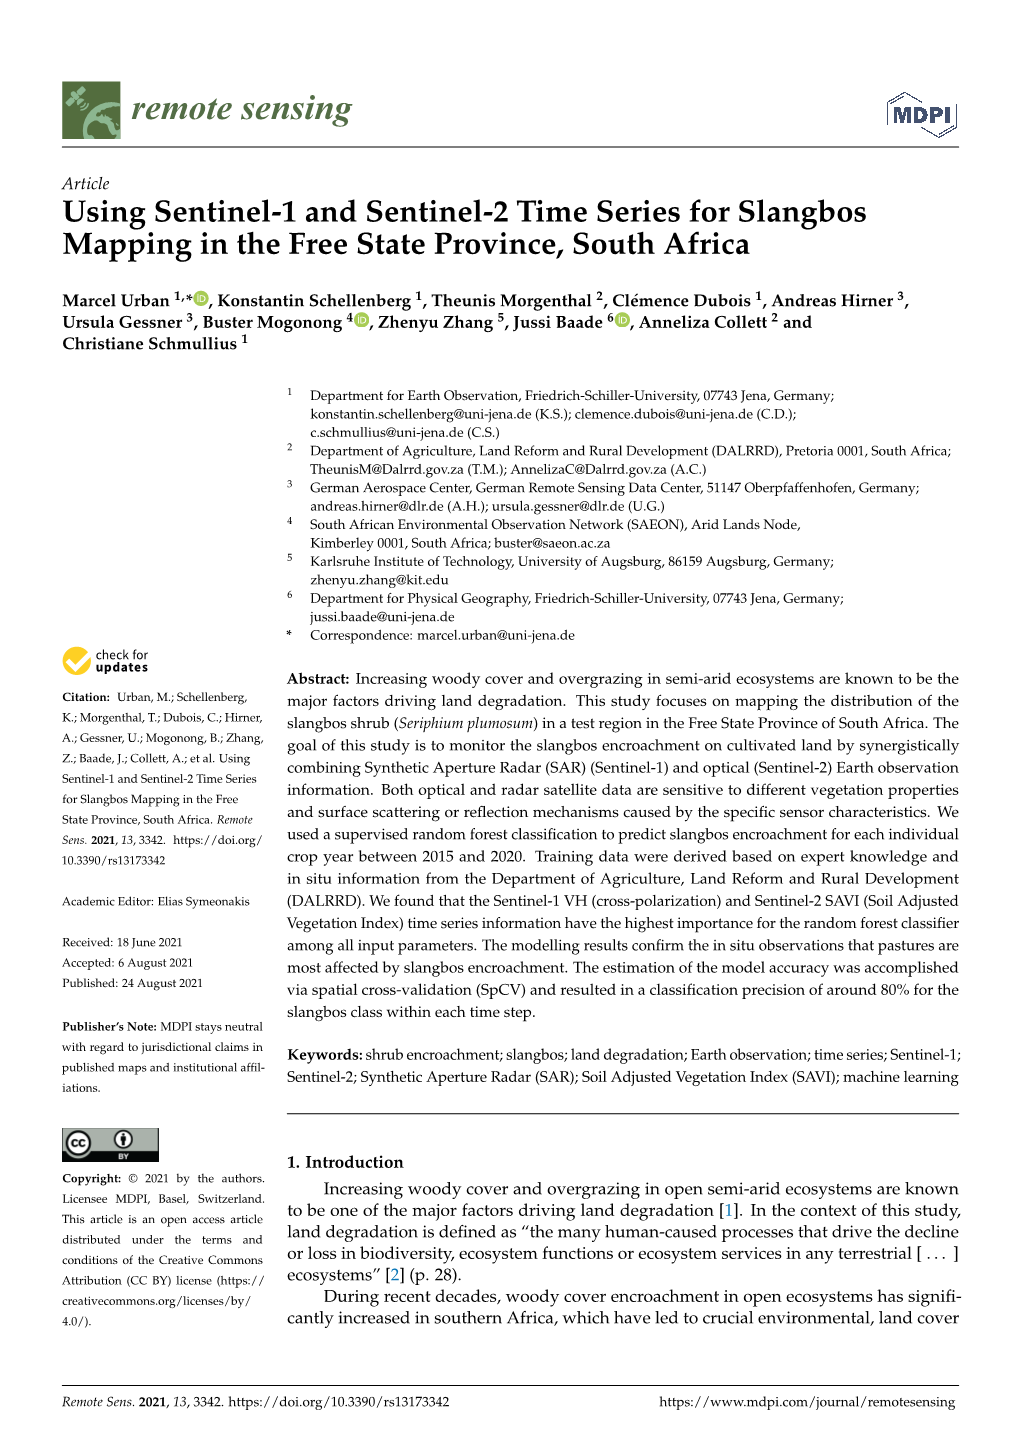 Using Sentinel-1 and Sentinel-2 Time Series for Slangbos Mapping in the Free State Province, South Africa